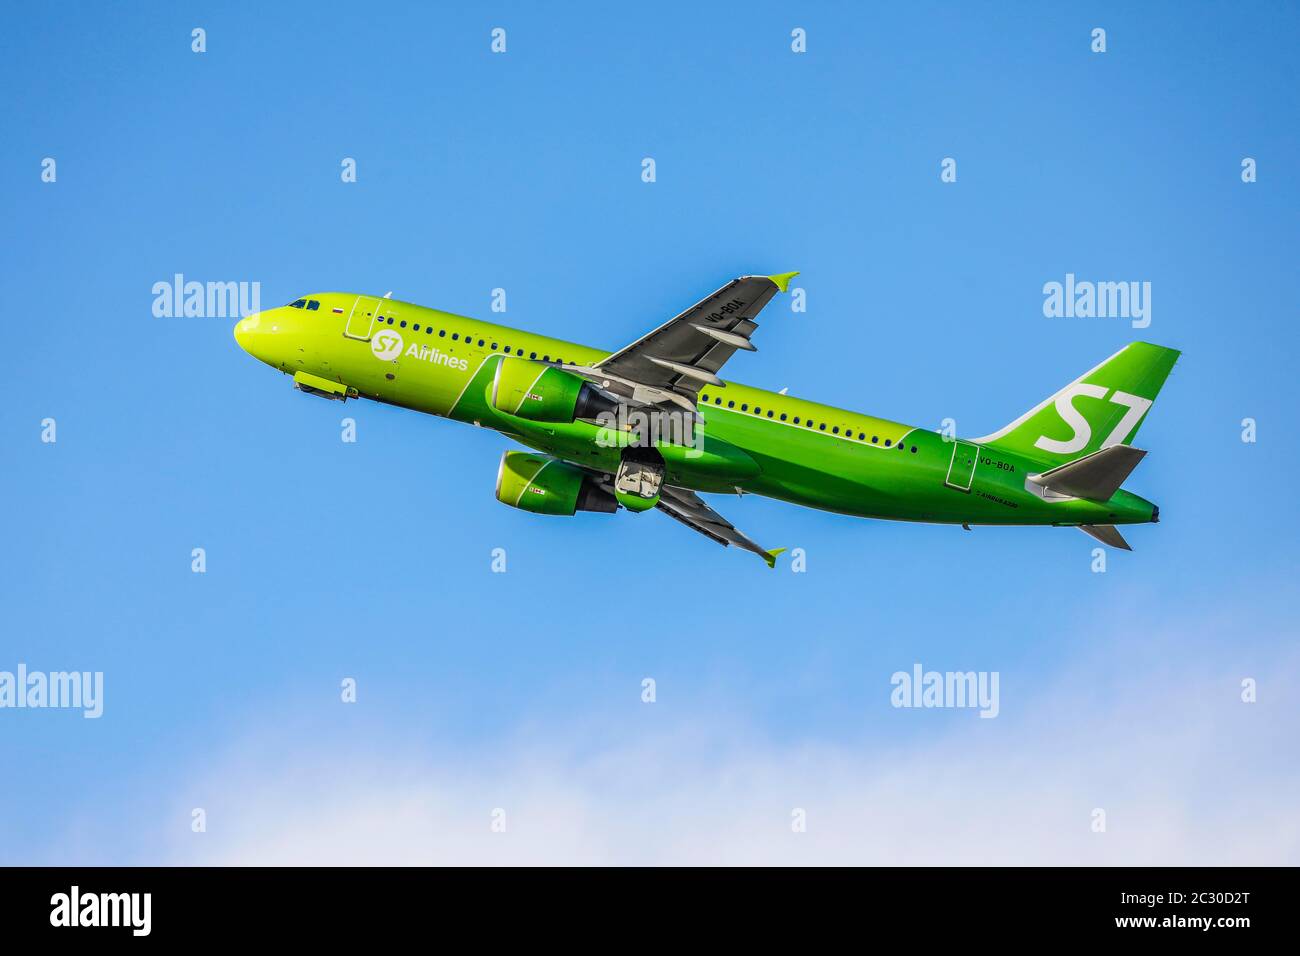 Russian S7 Airlines, Airbus A320 aircraft takes off at Duesseldorf International Airport, VQ-BOA S7 SIBERIA AIRLINES AIRBUS A320-200, Duesseldorf Stock Photo